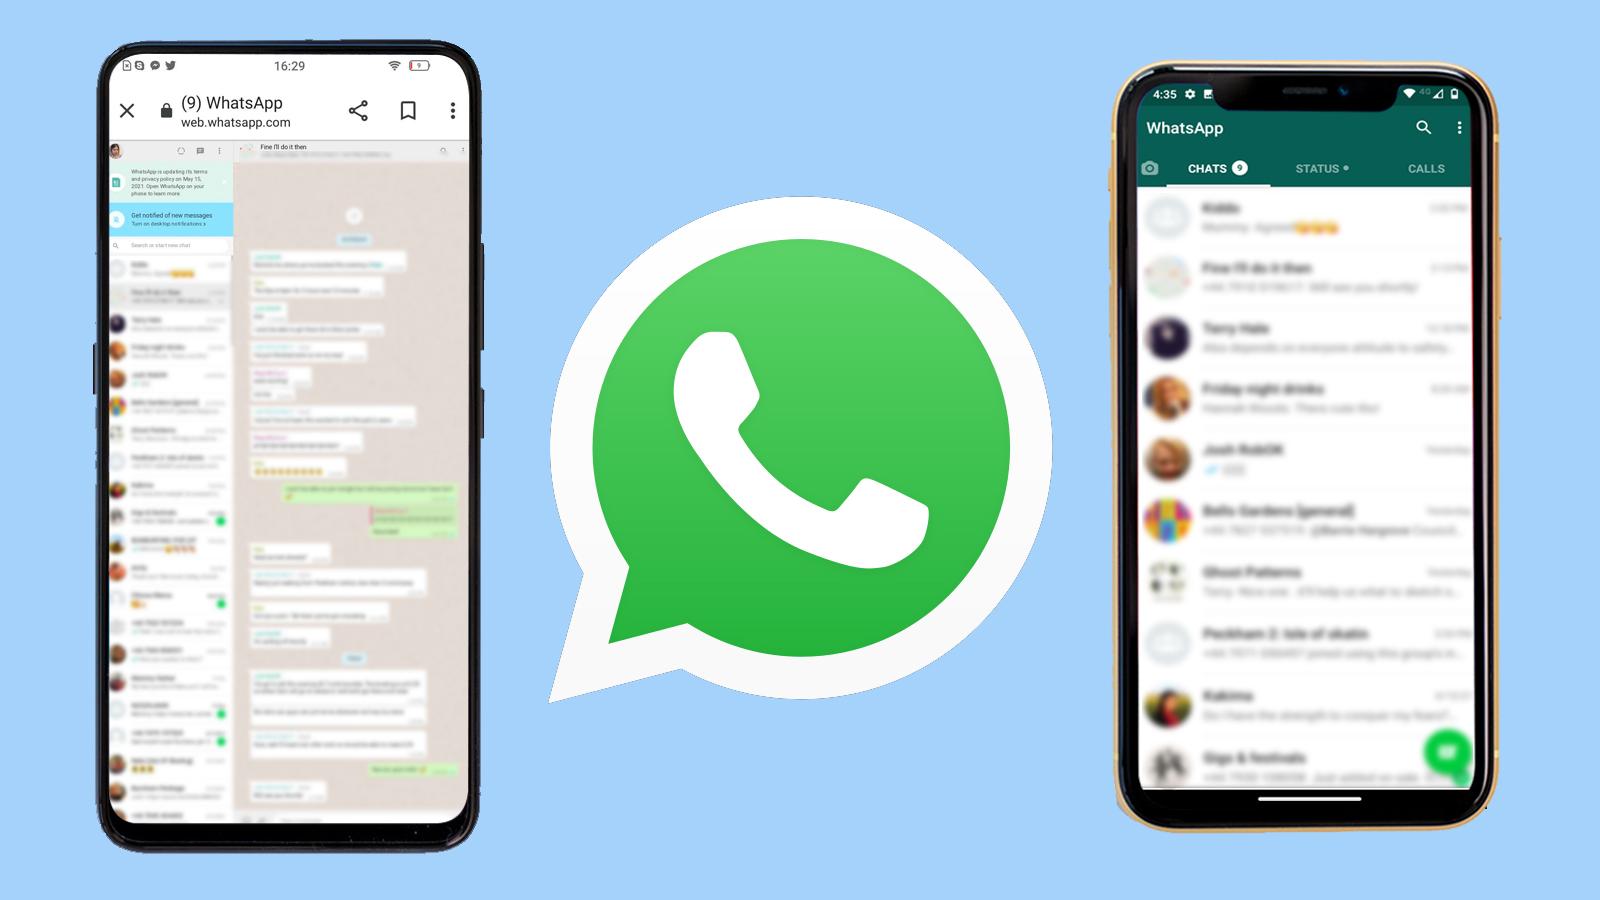 How to enable WhatsApp on multiple Android devices and iPhones